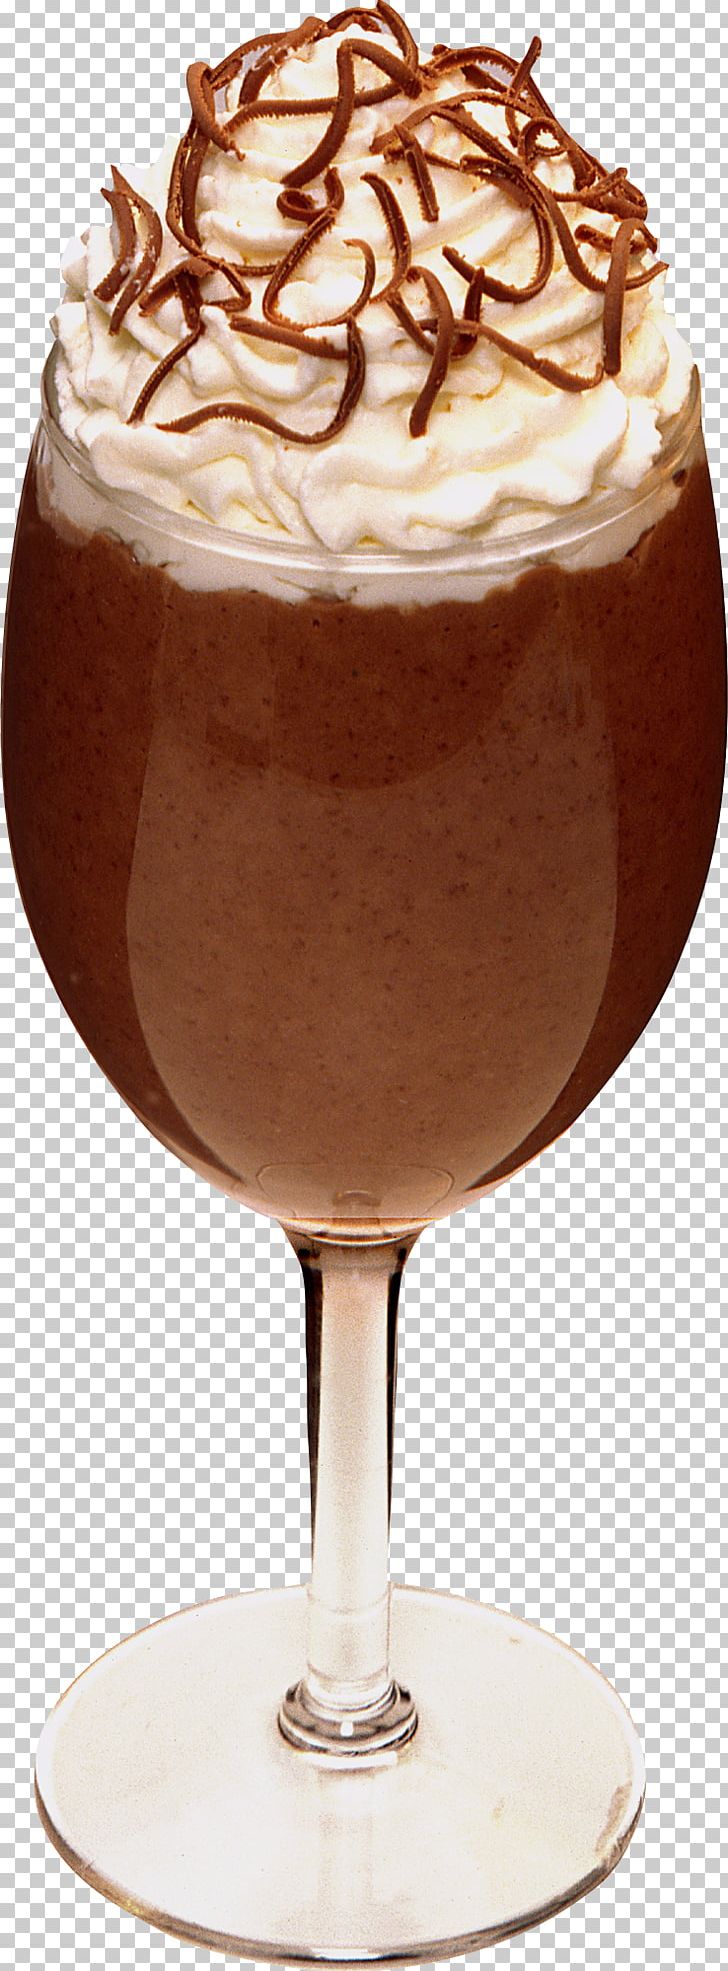 Chocolate Ice Cream Chocolate Pudding Mousse Parfait PNG, Clipart, Chocolate, Chocolate Cake, Chocolate Ice Cream, Chocolate Milk, Chocolate Syrup Free PNG Download